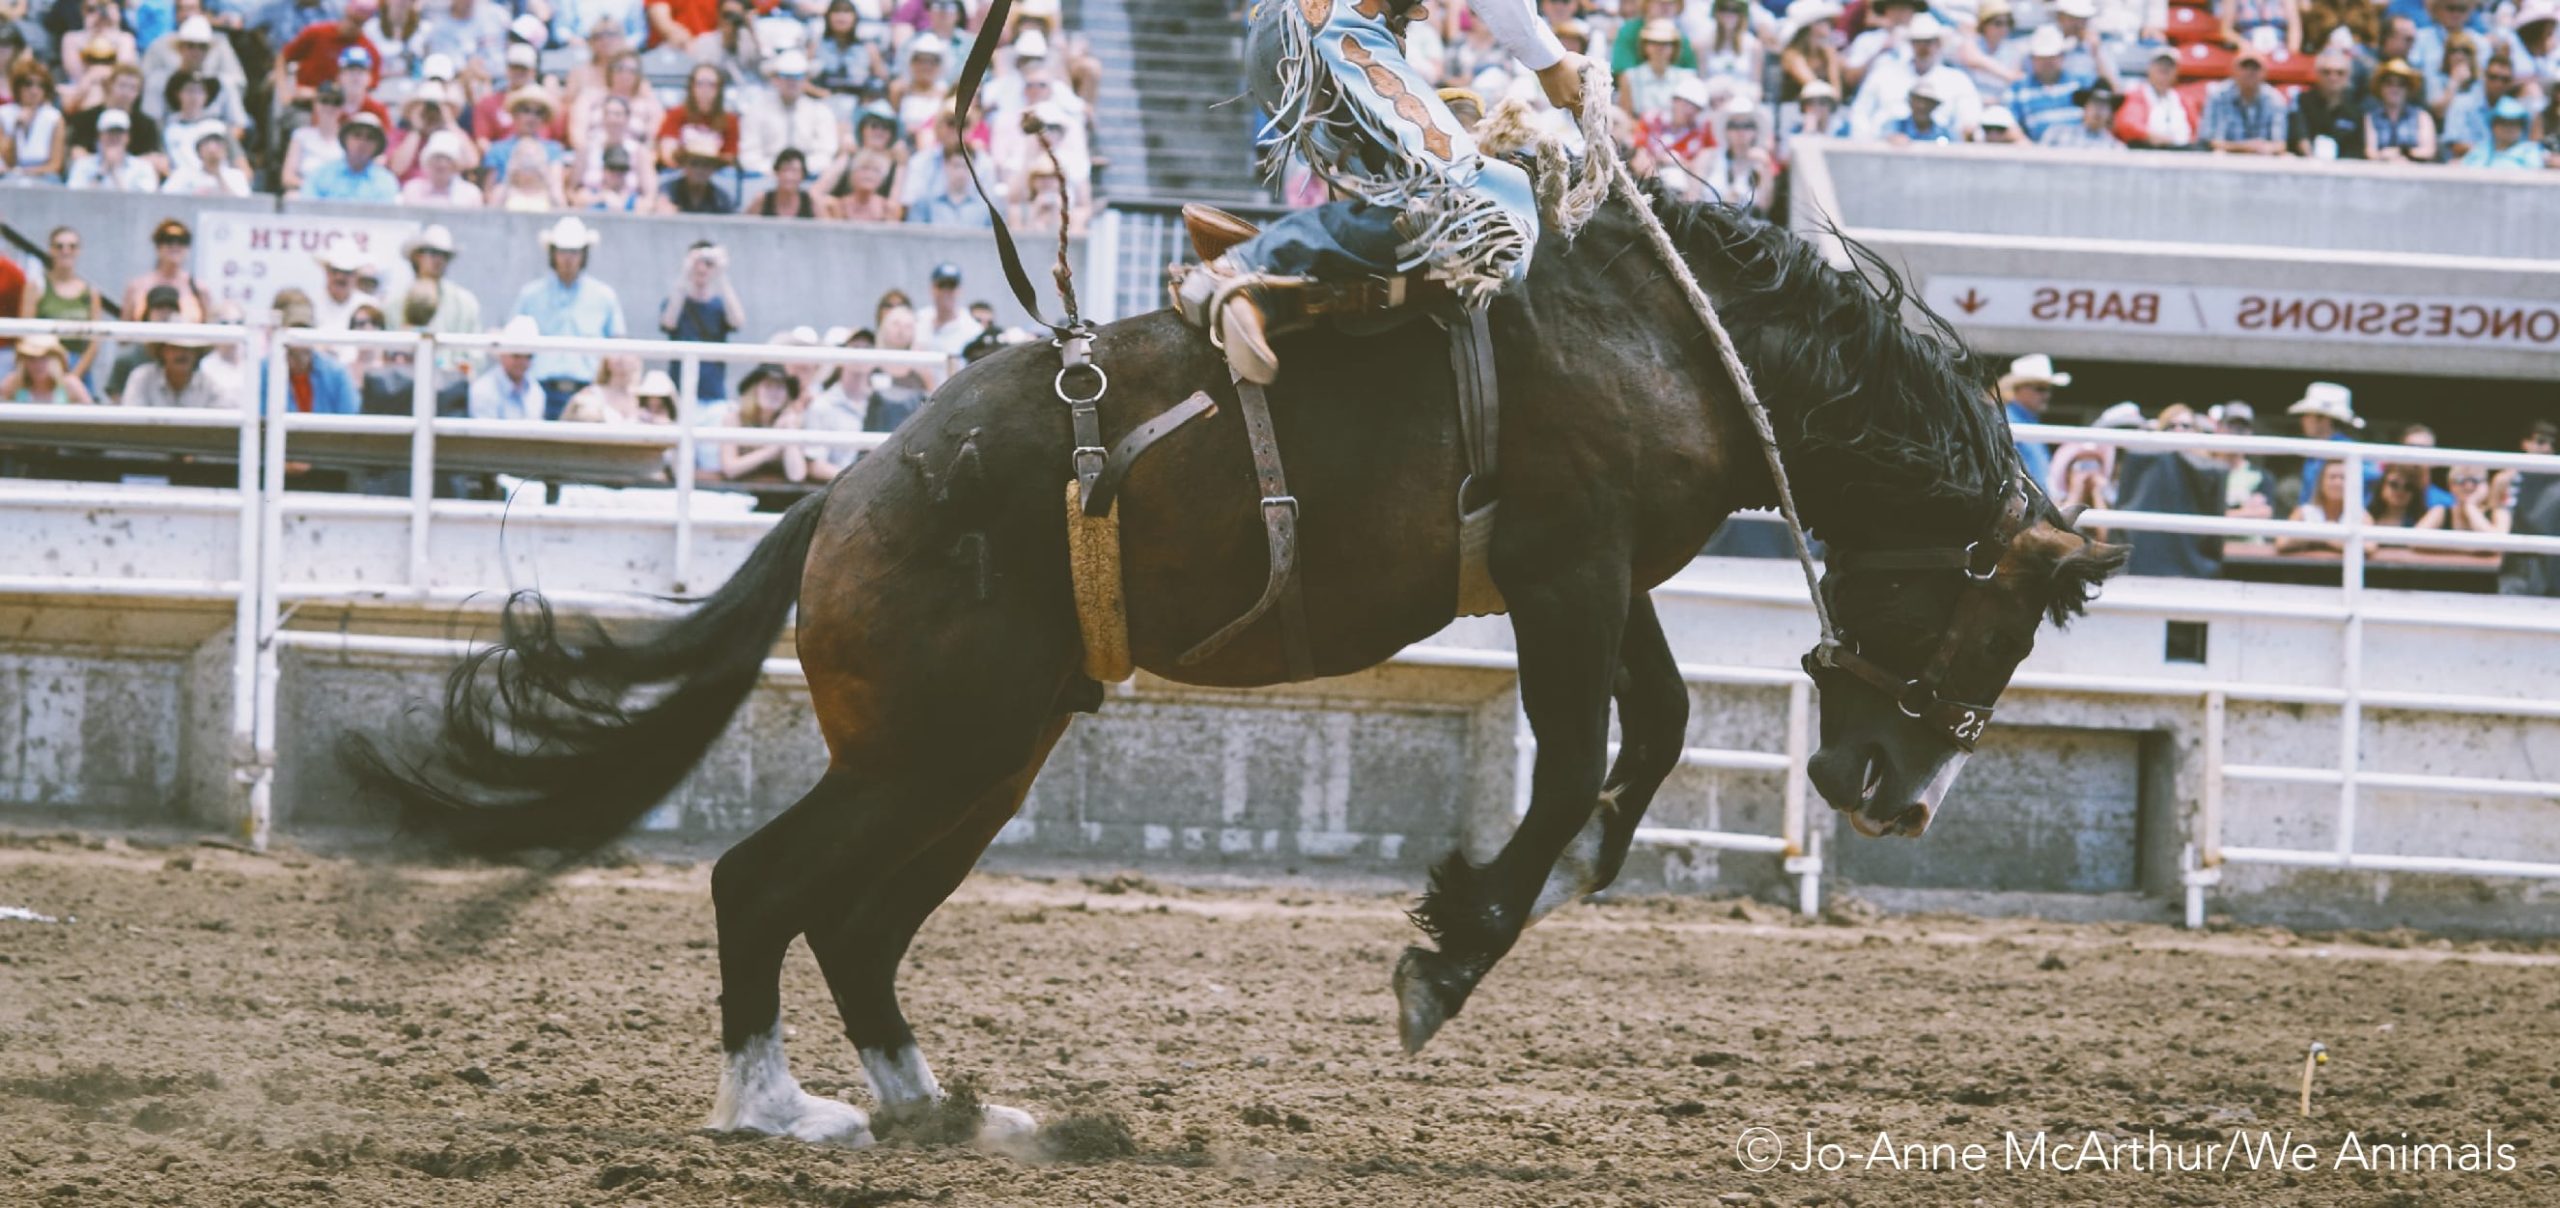 #36: Time to Stamp out Rodeo Cruelty at the Calgary Stampede